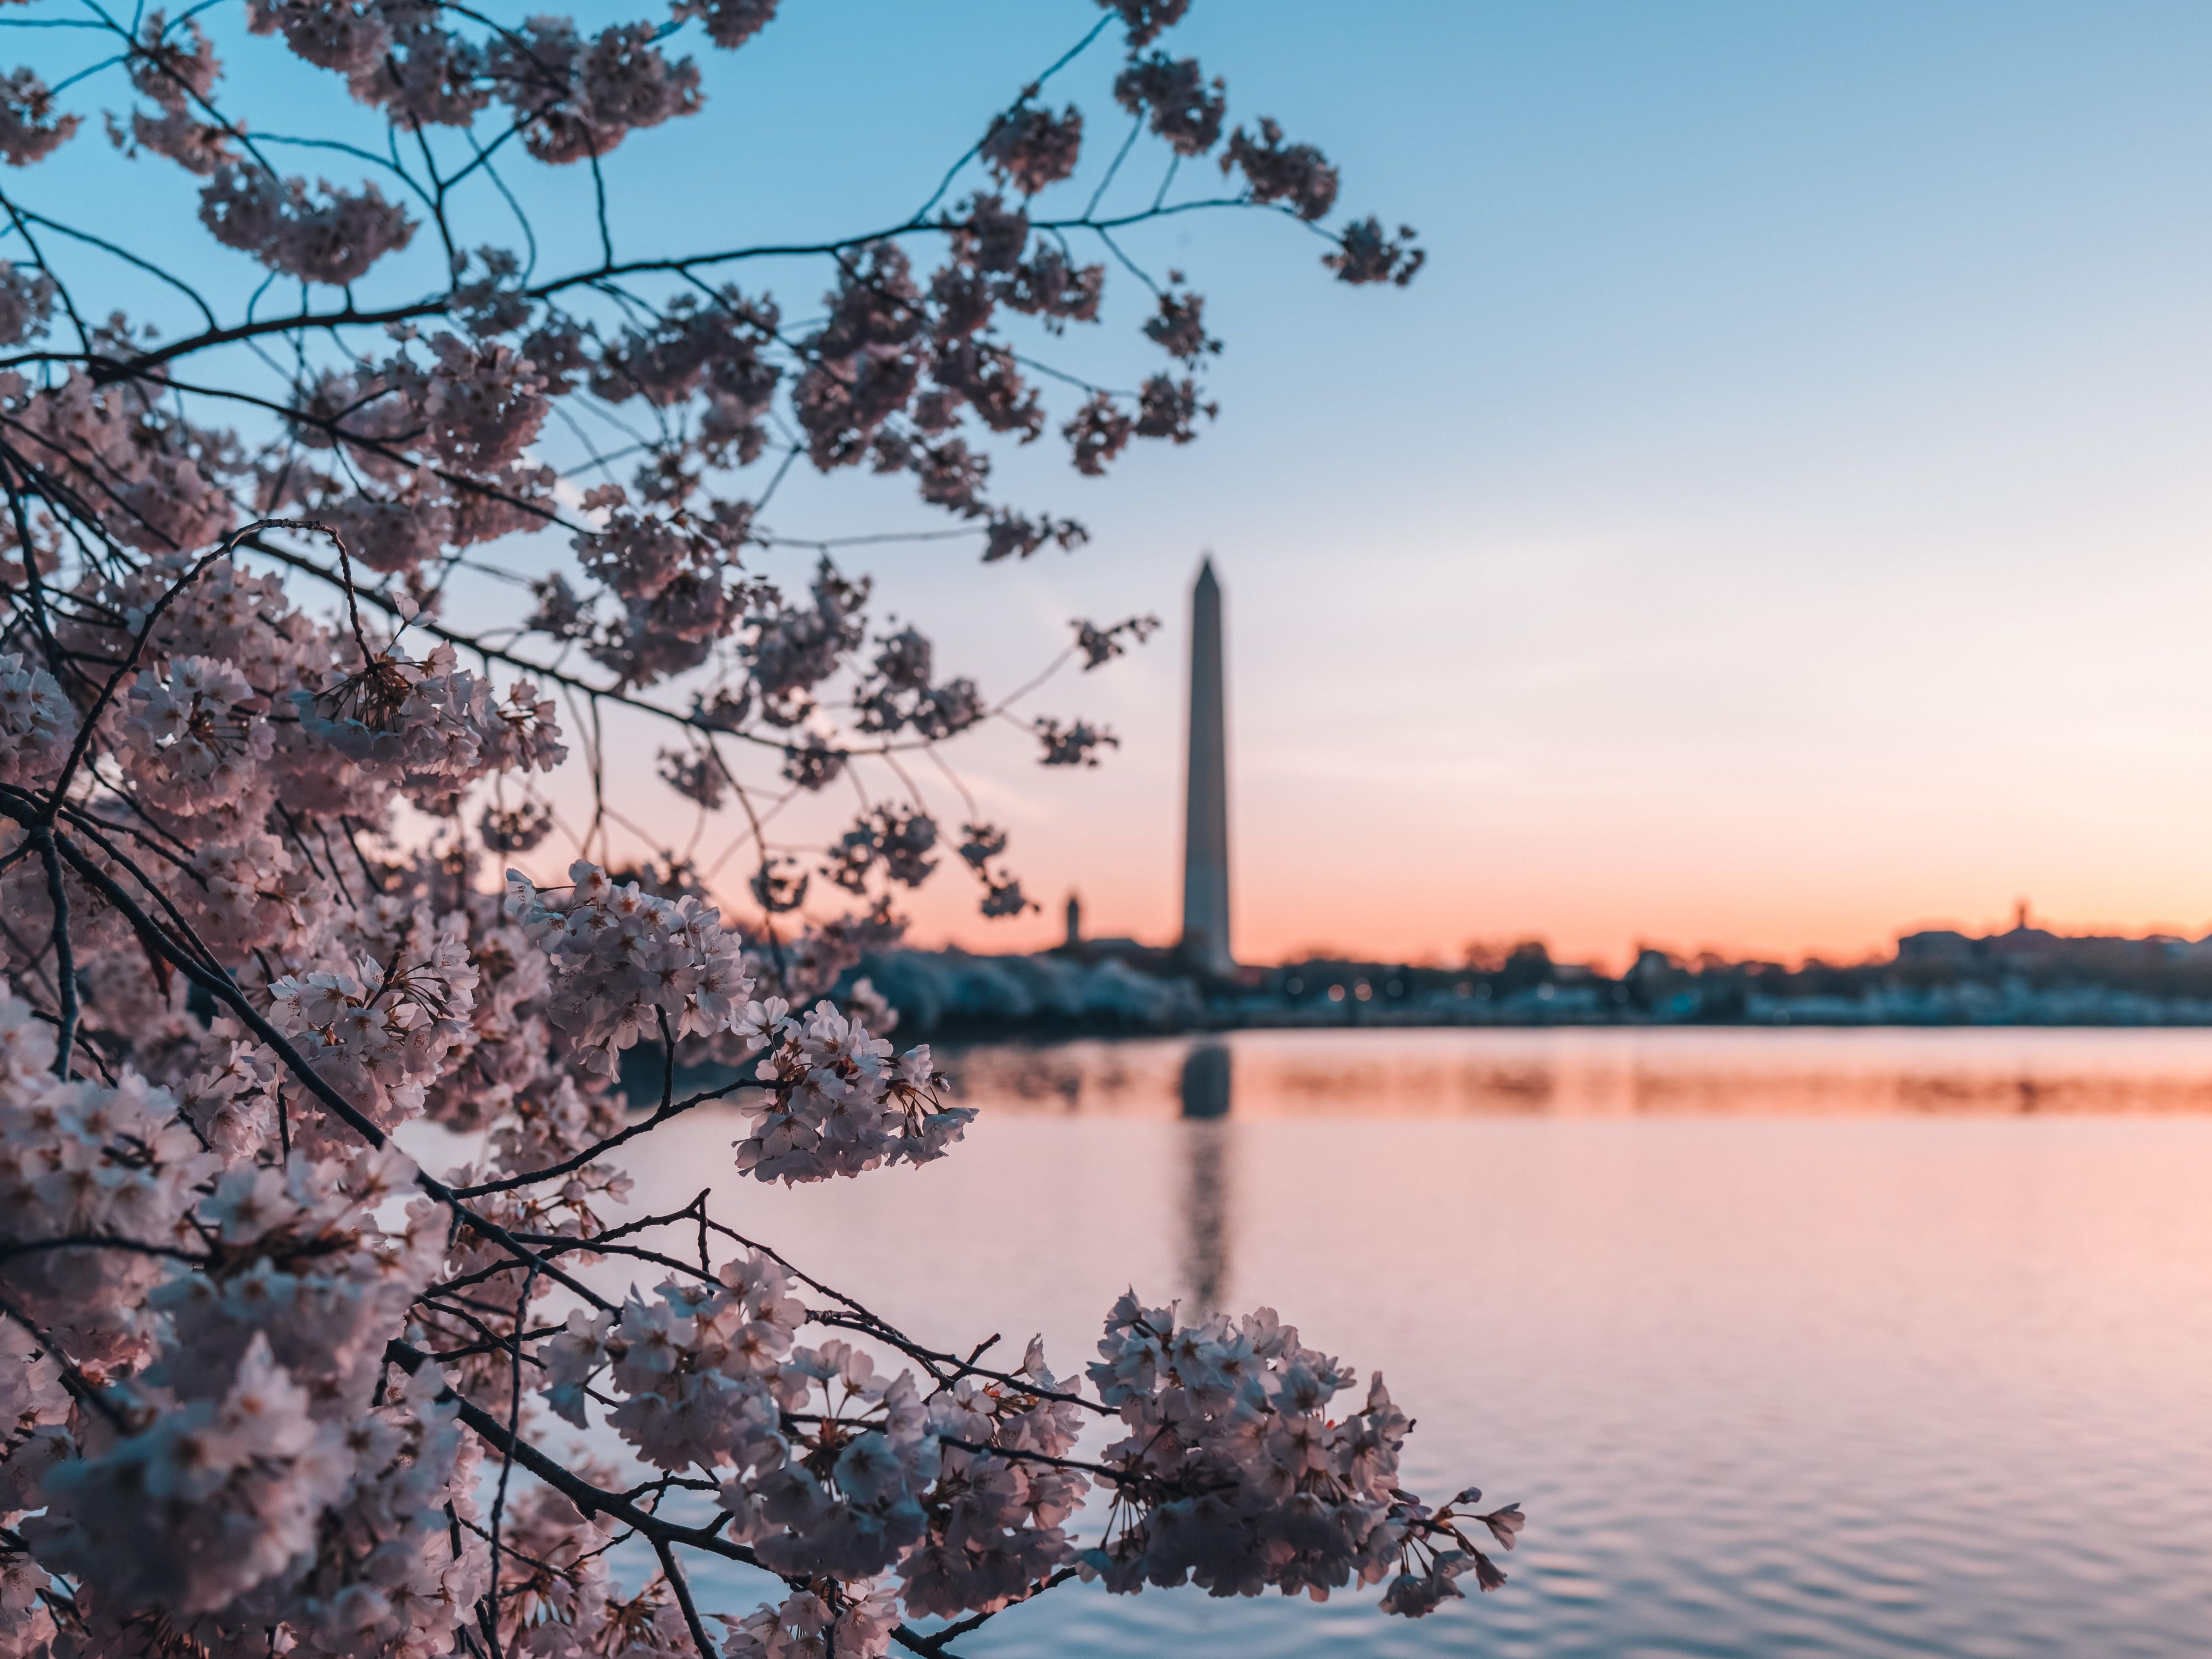 Stay For The Iconic Cherry Blossoms